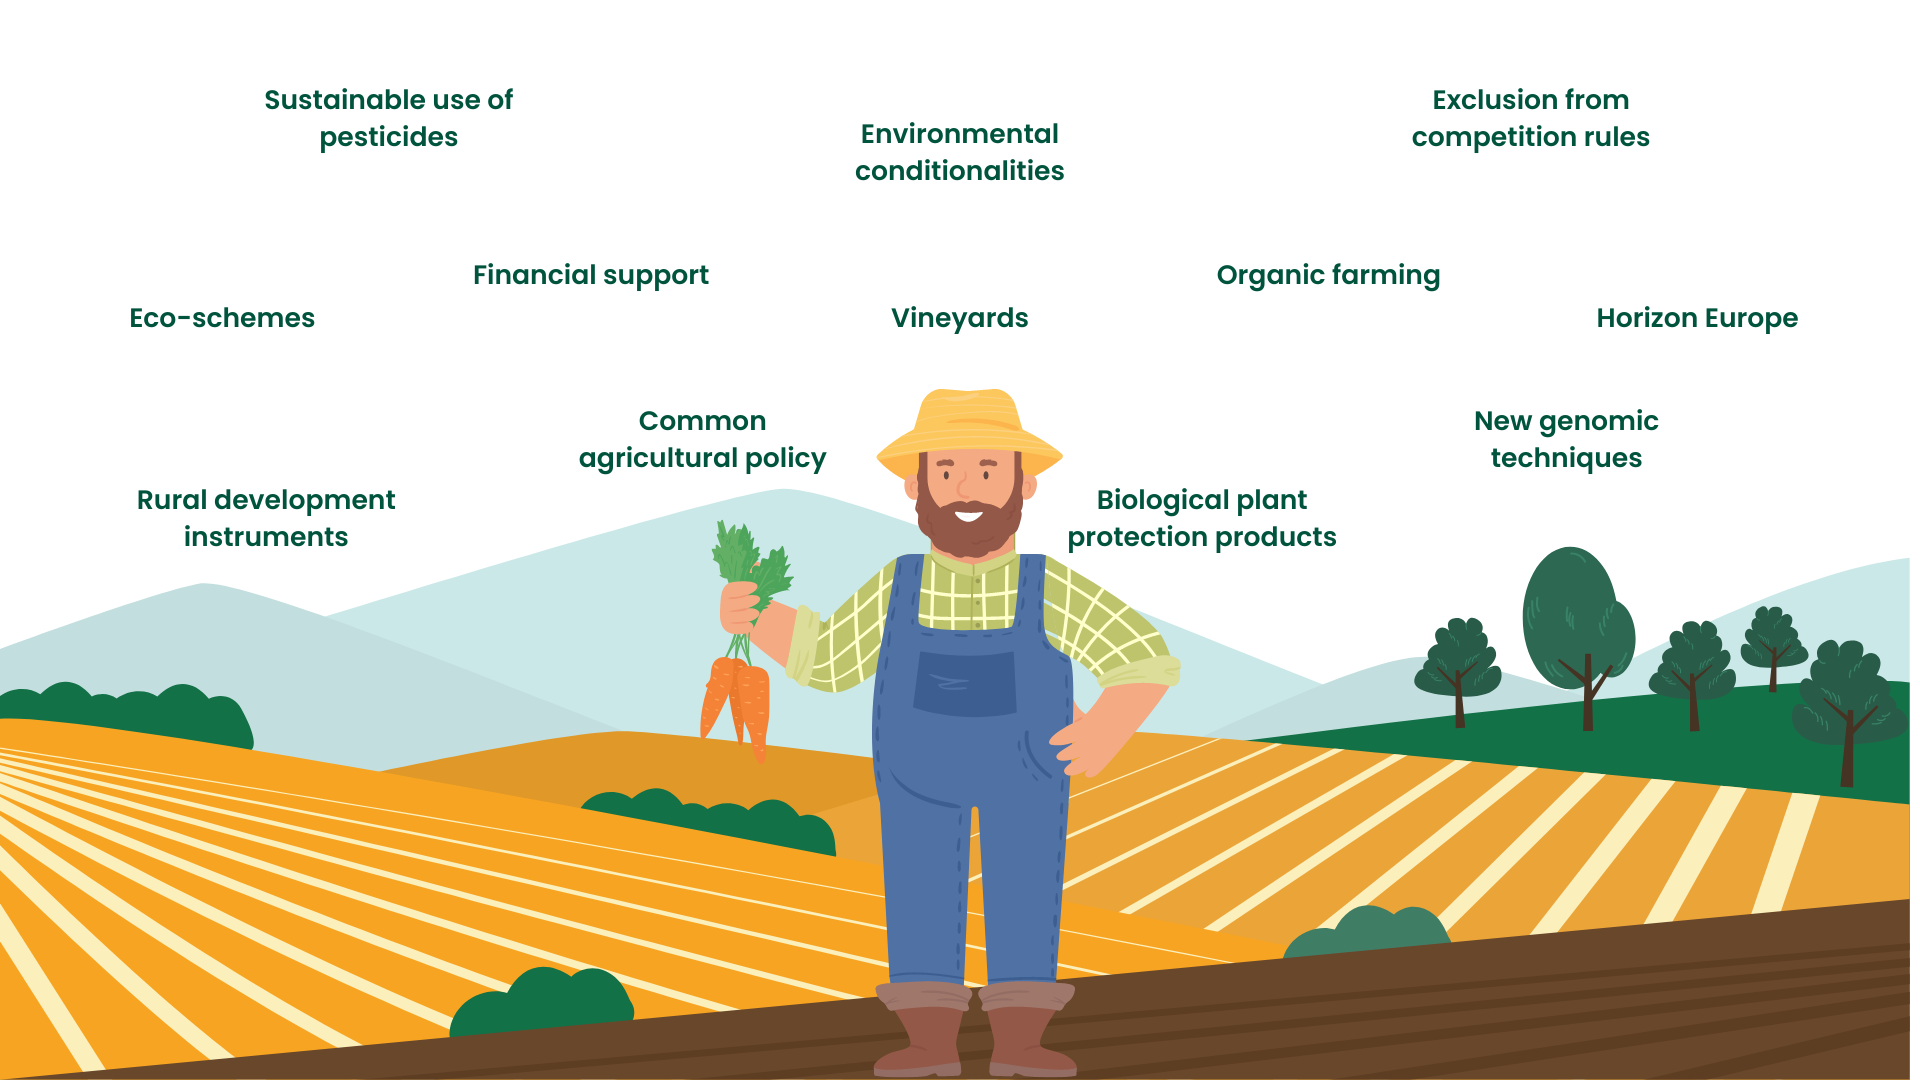 Save Bees and Farmers Initiative: how is your business impacted by EU agrifood policies?